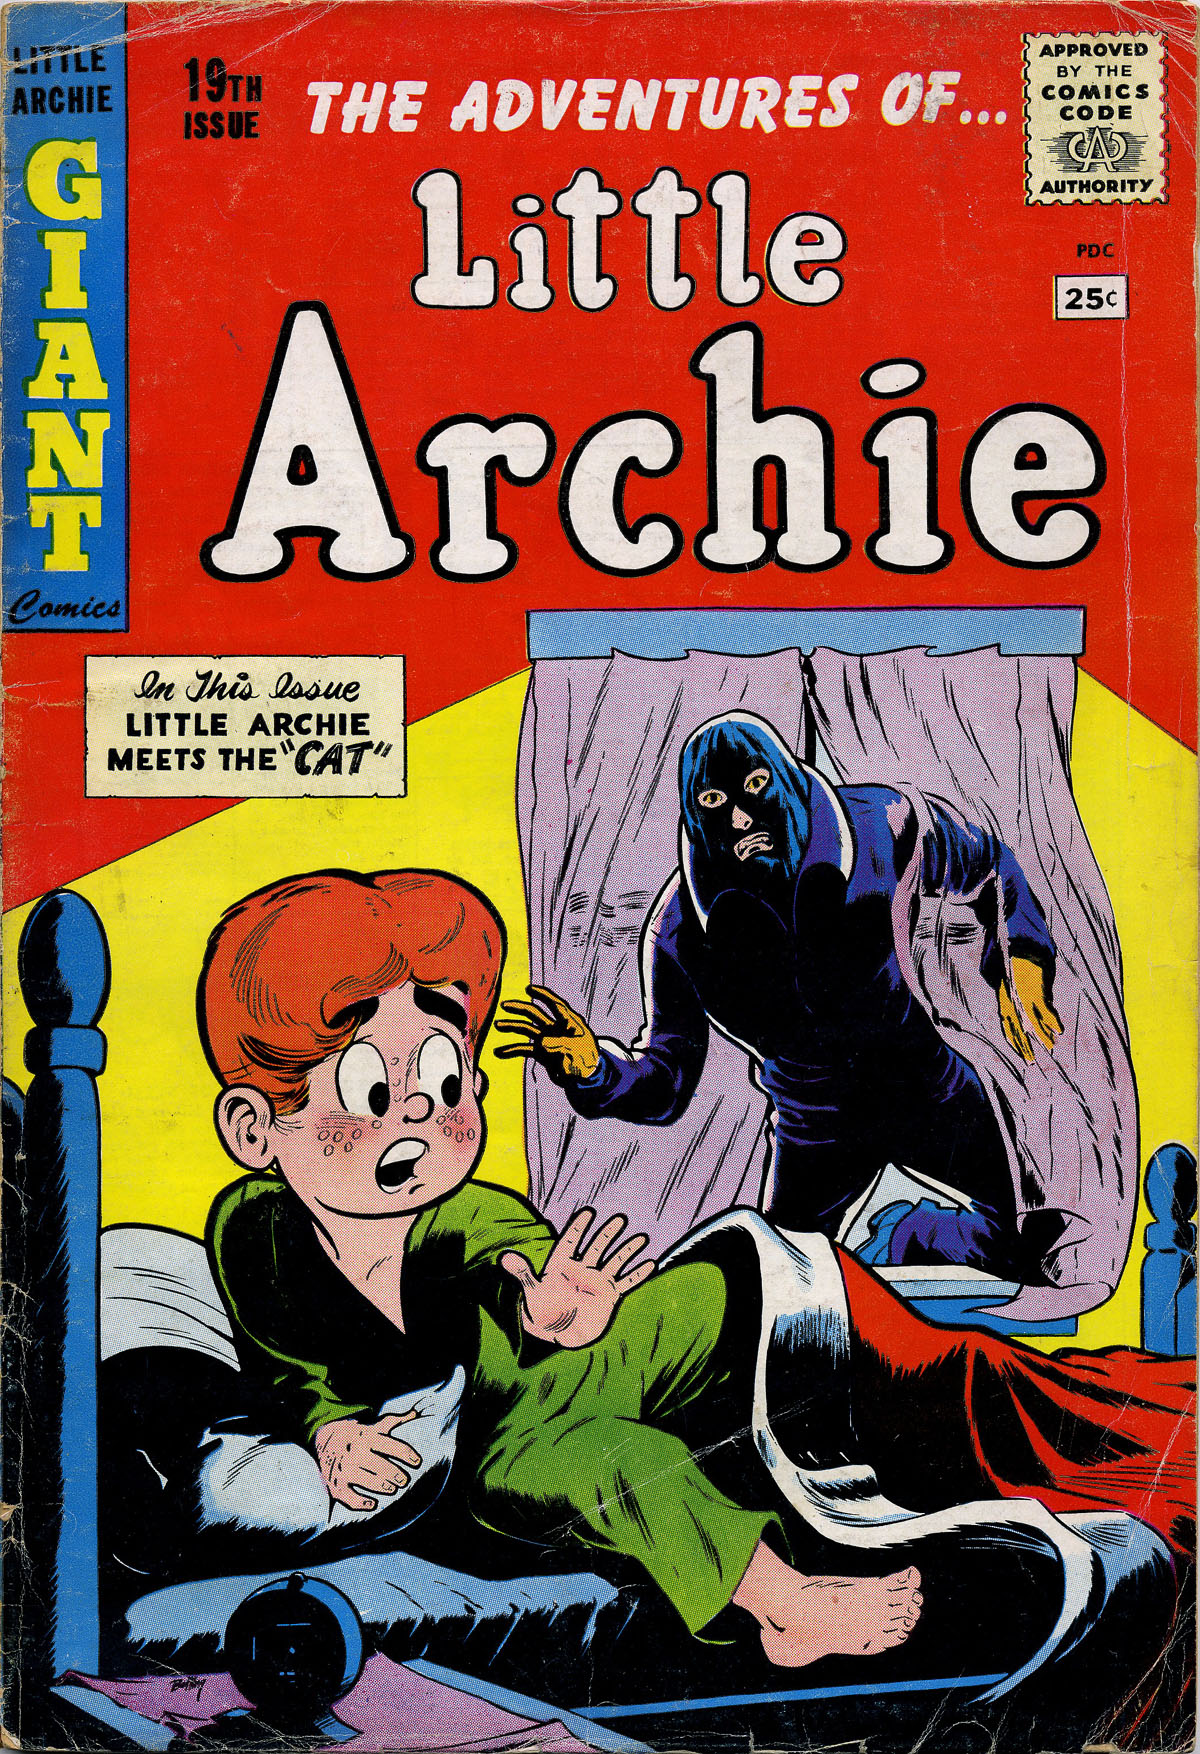 Read online The Adventures of Little Archie comic -  Issue #19 - 1